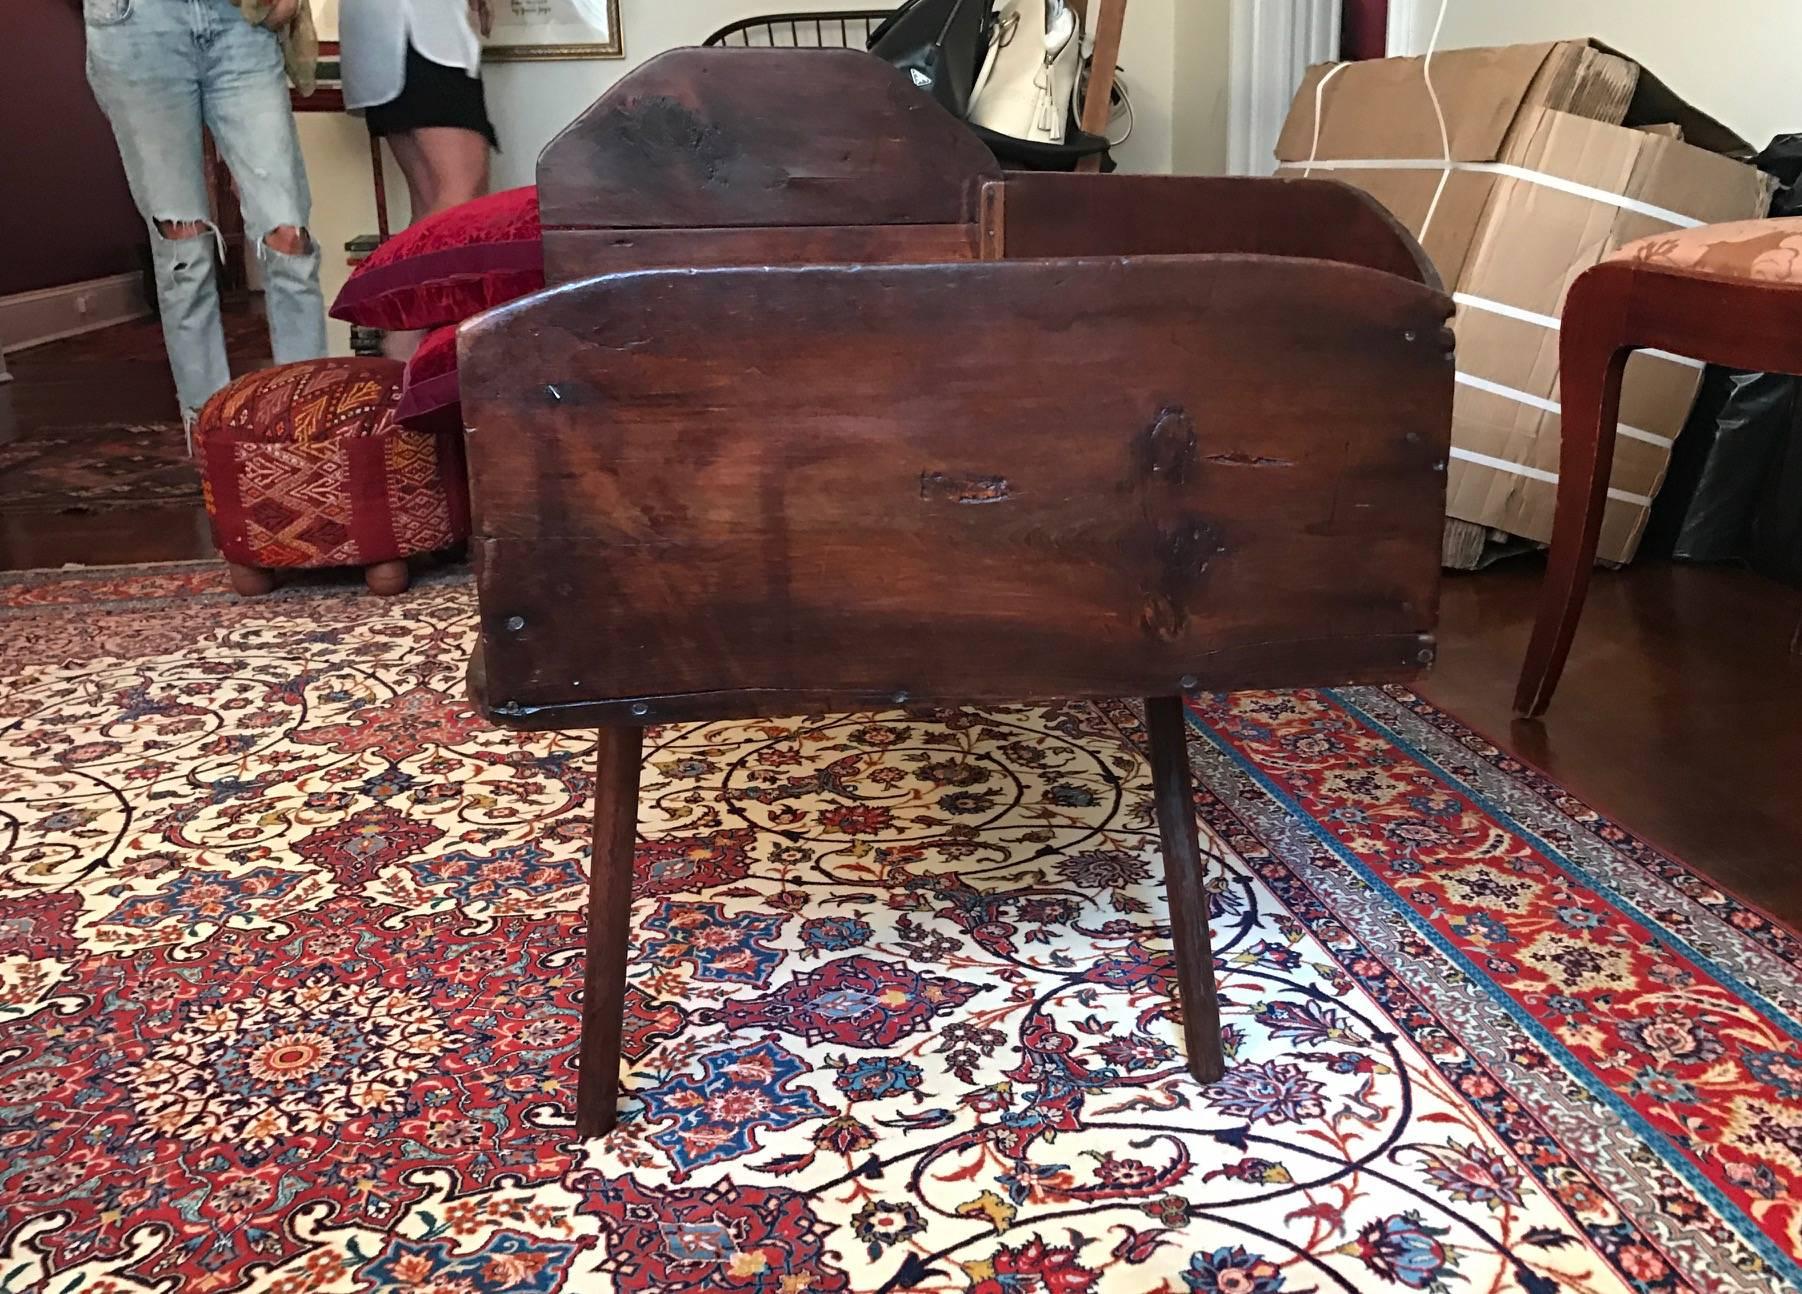 Early 20th Century Really Cool Mahogany Vintage Cradle Made into a Cool Coffee or Center Table